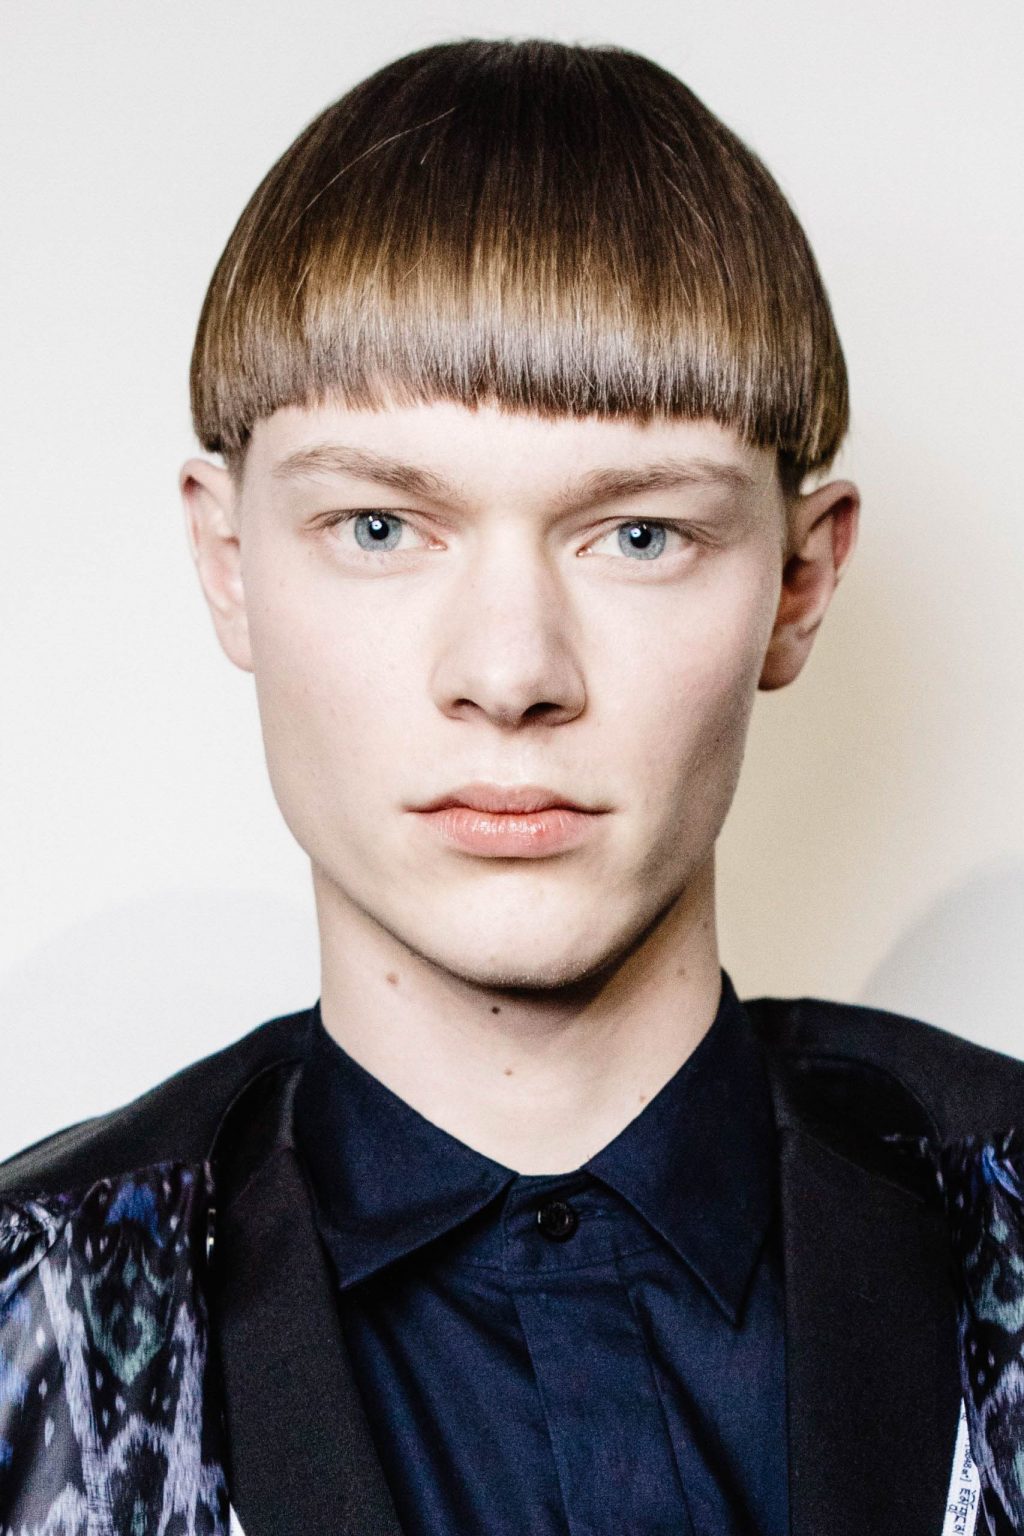 Best Bowl Cut Hairstyles Haircut For Men Edition